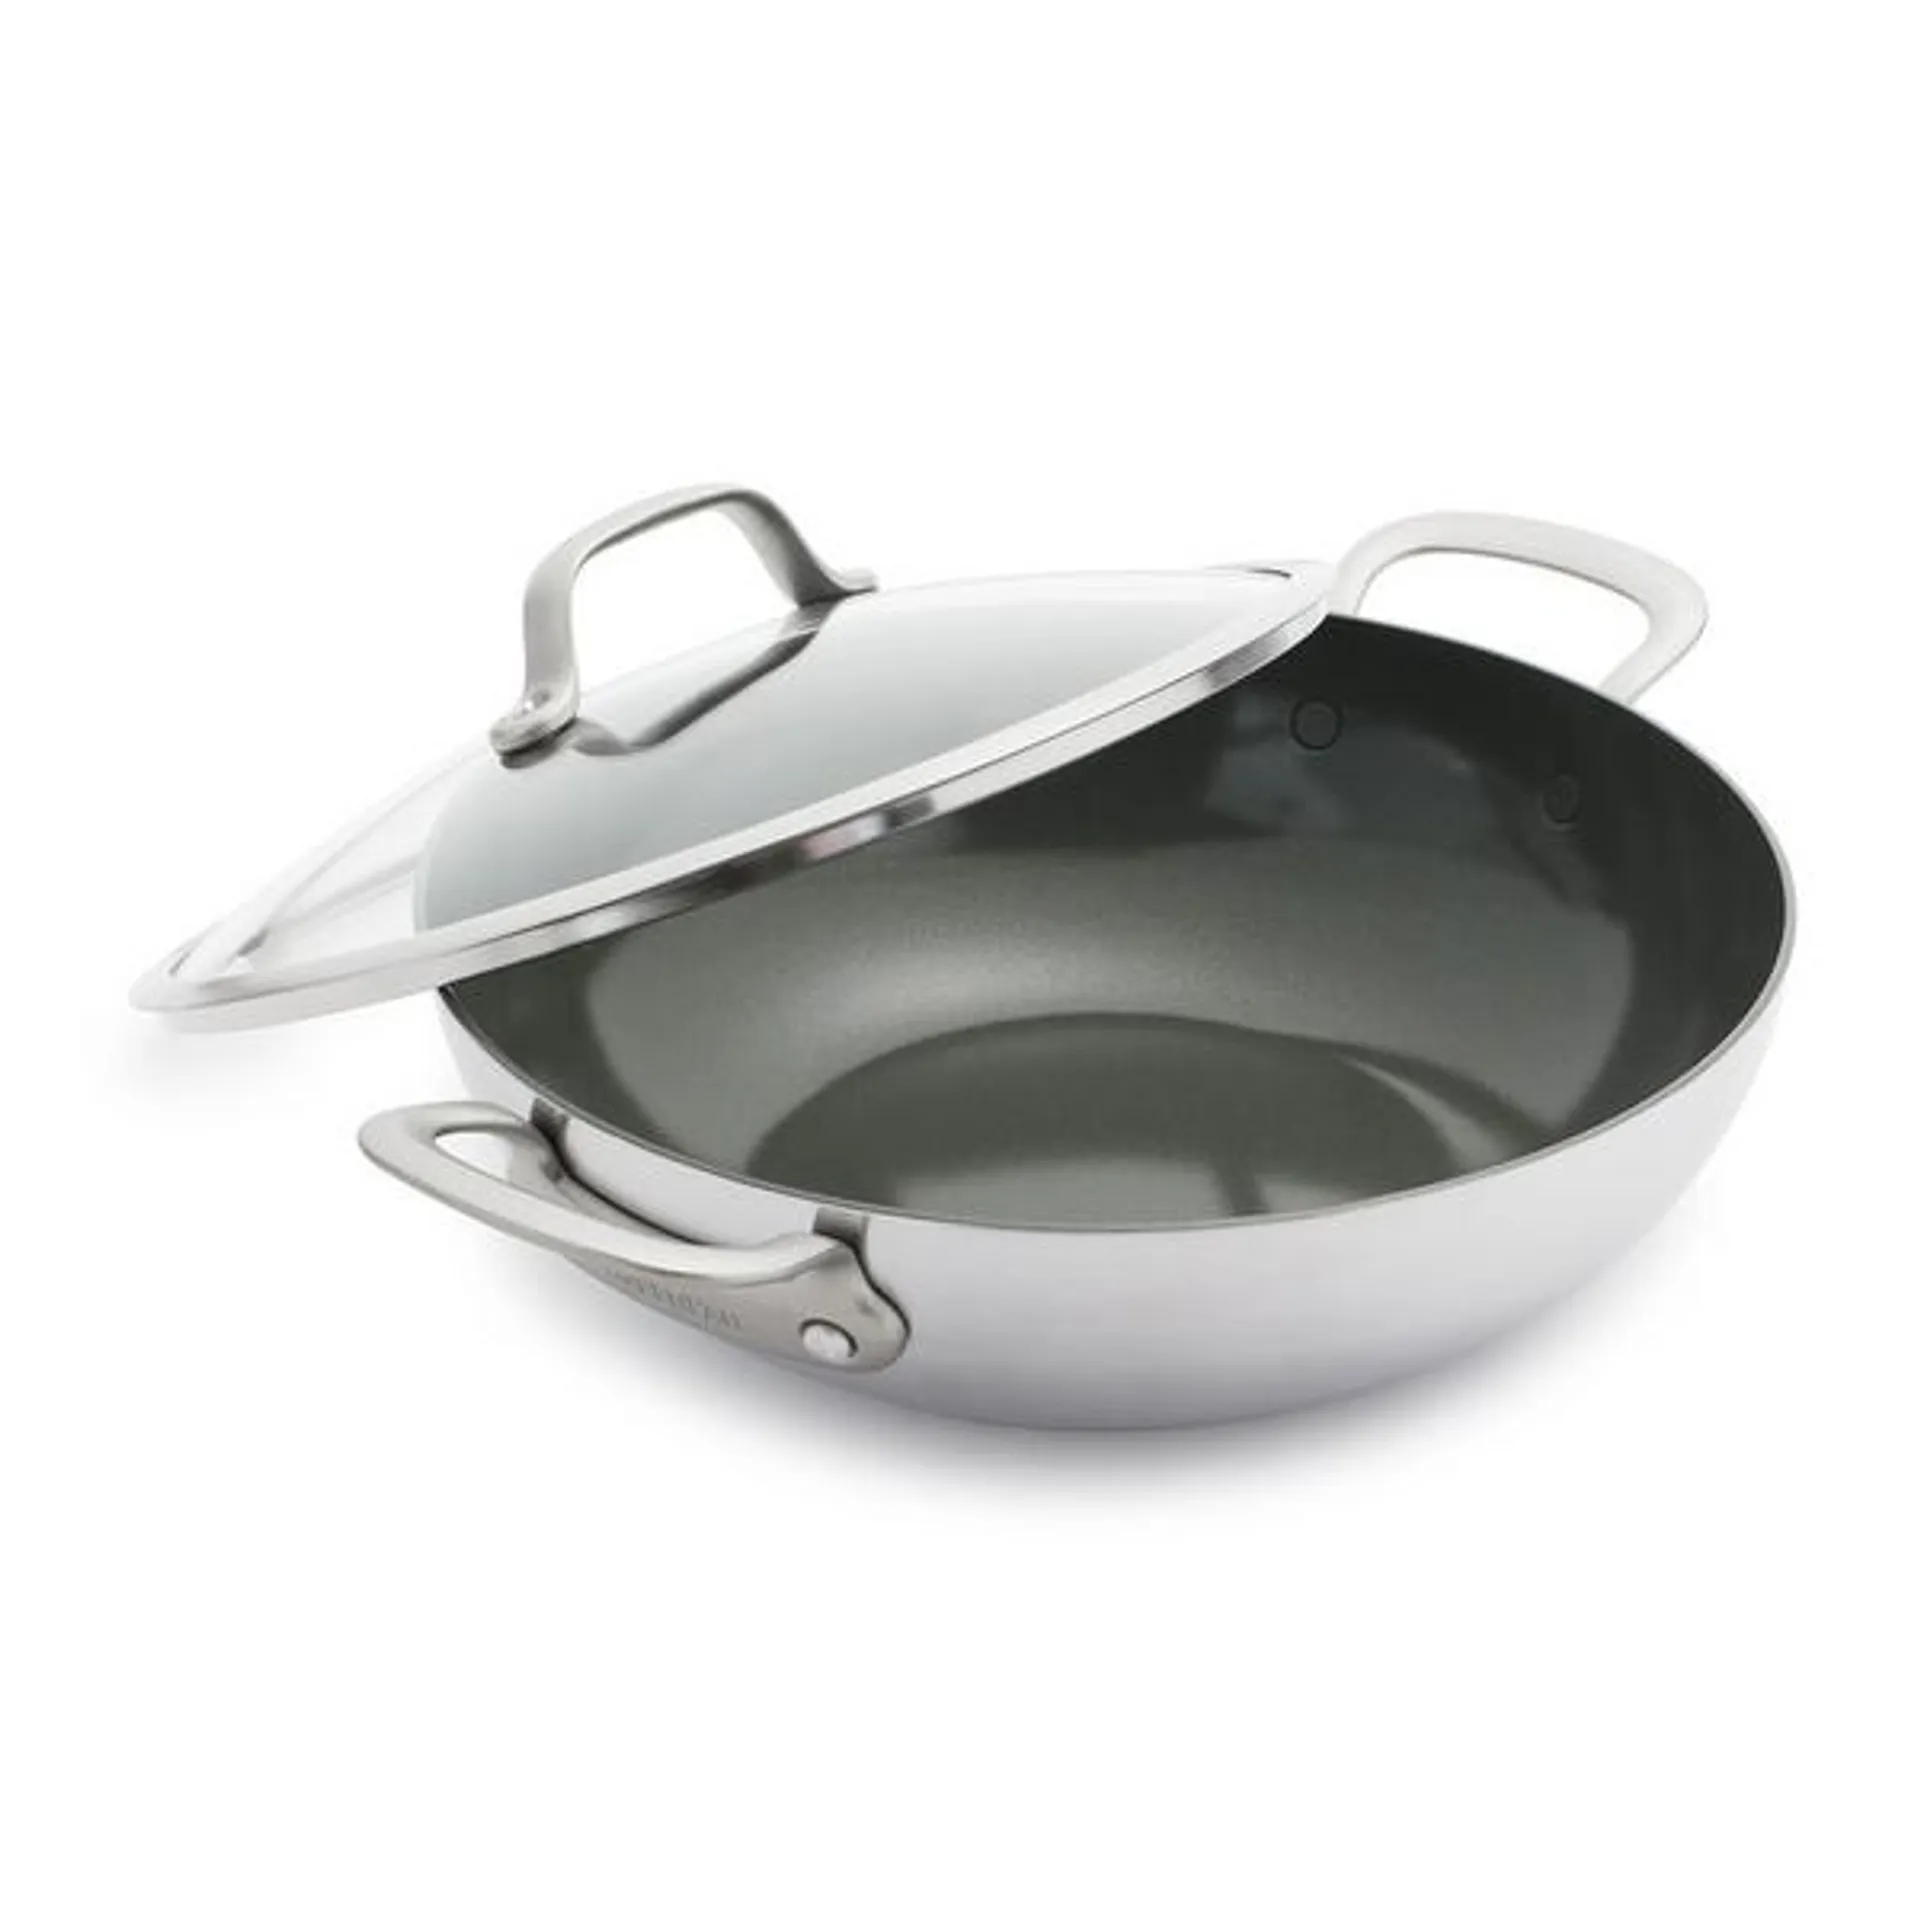 GreenPan Craft Steel Chef’s Pan with Lid, 5 qt.